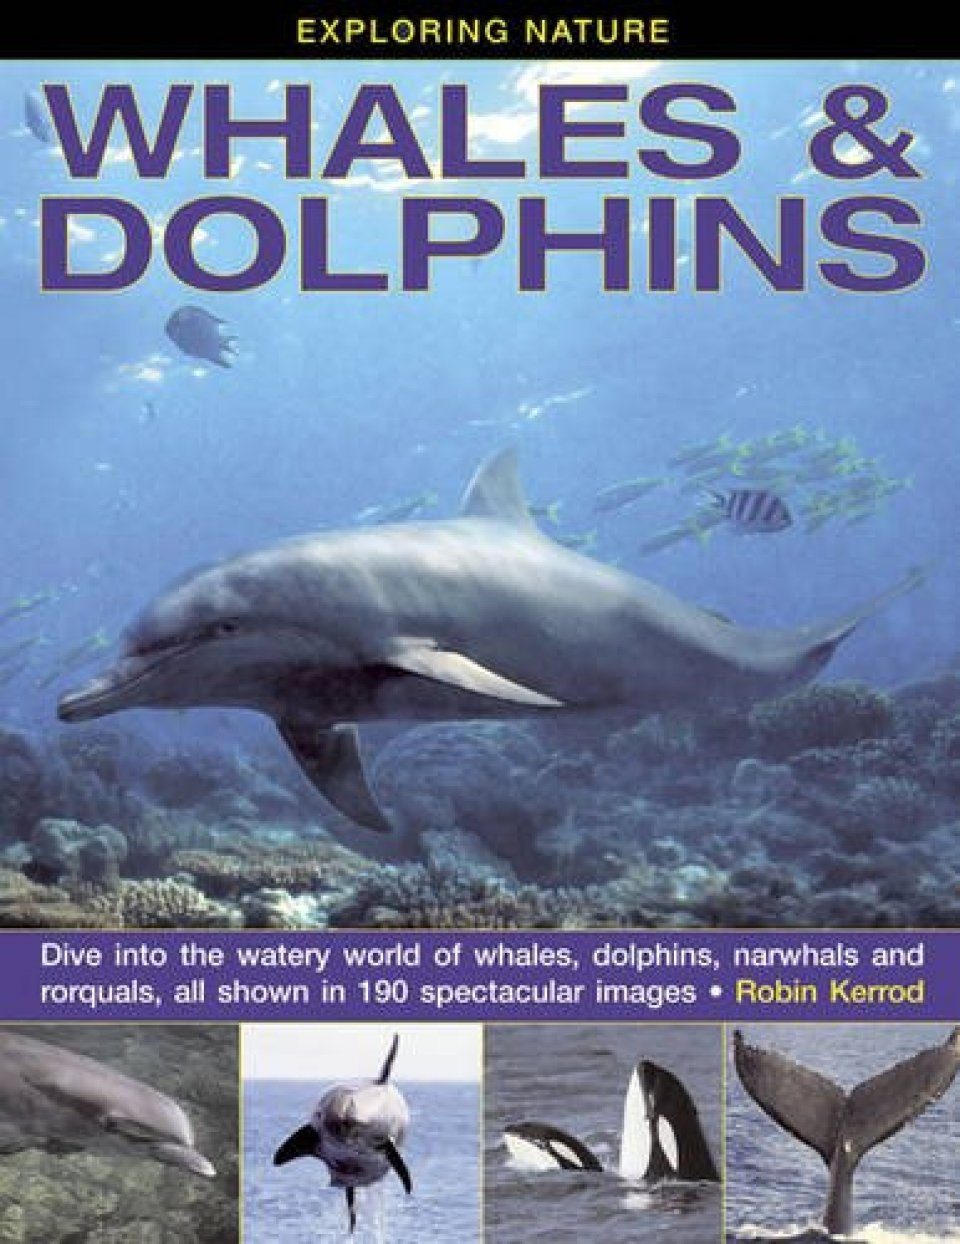 Whales & Dolphins | NHBS Academic & Professional Books